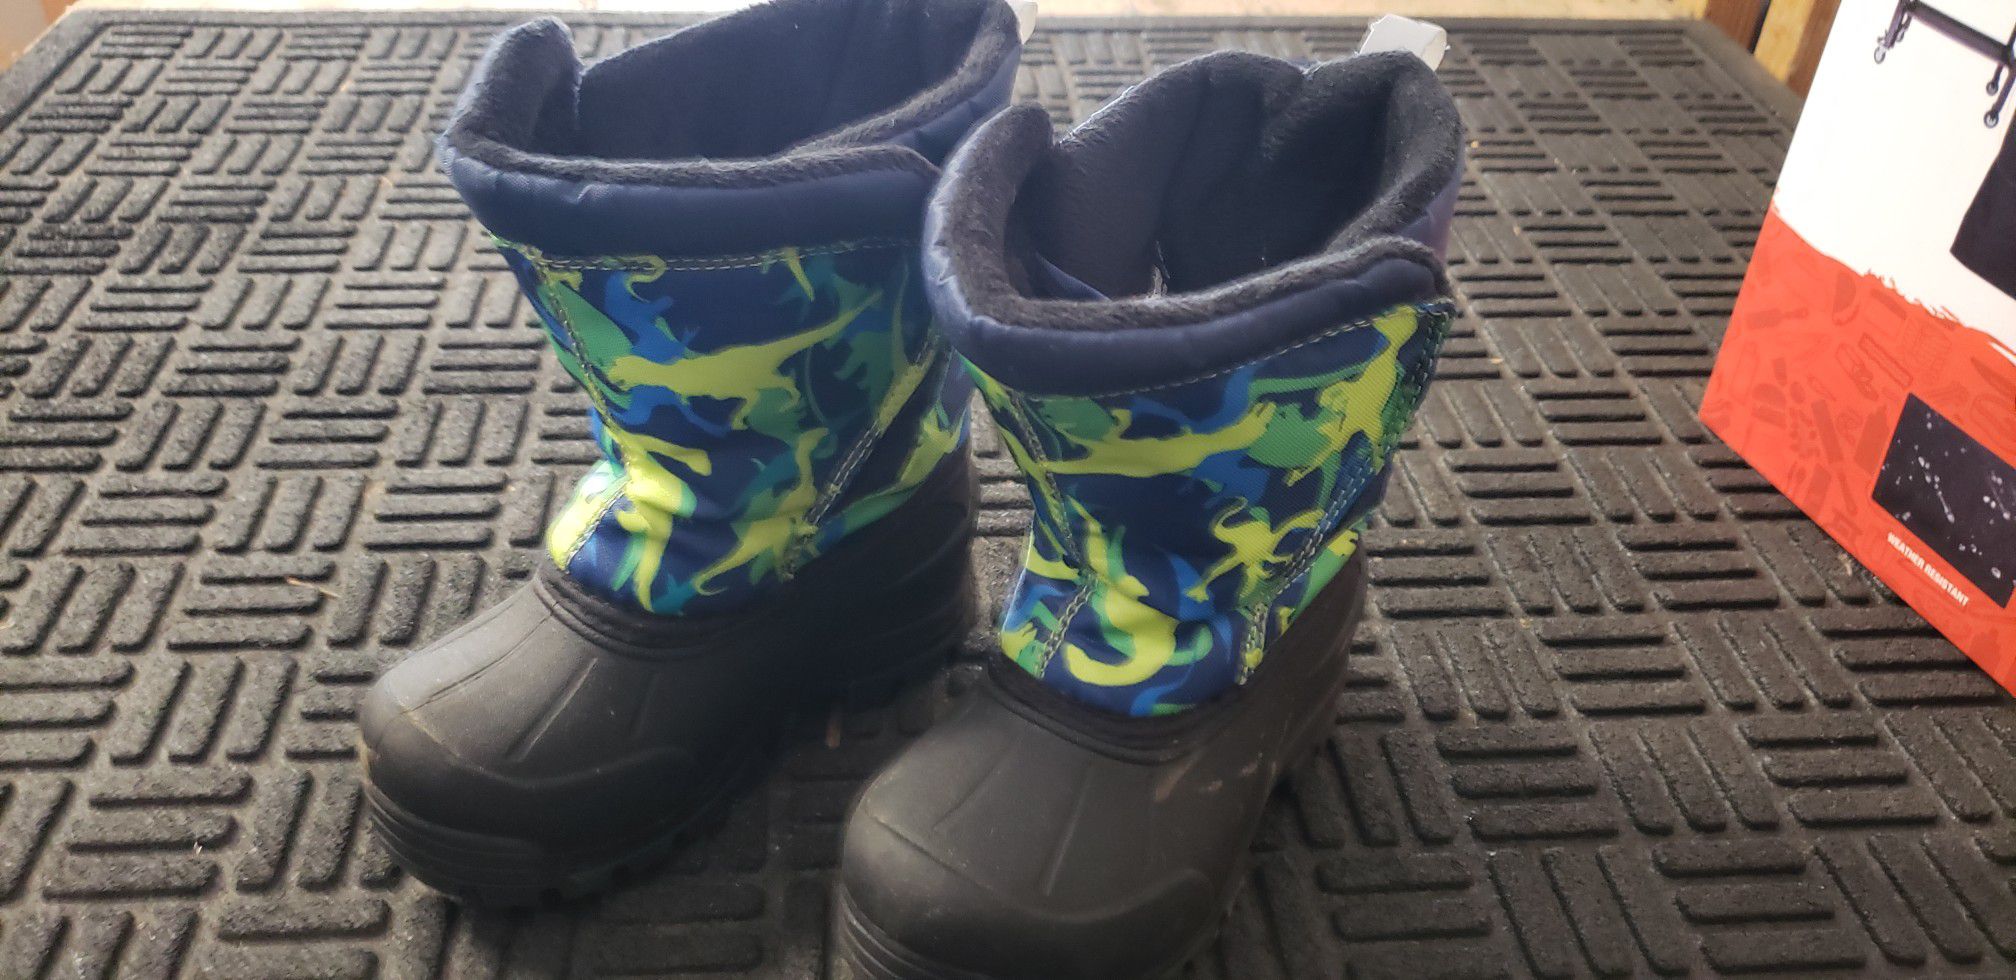 Thinsulate Kids Snow Boots size 7